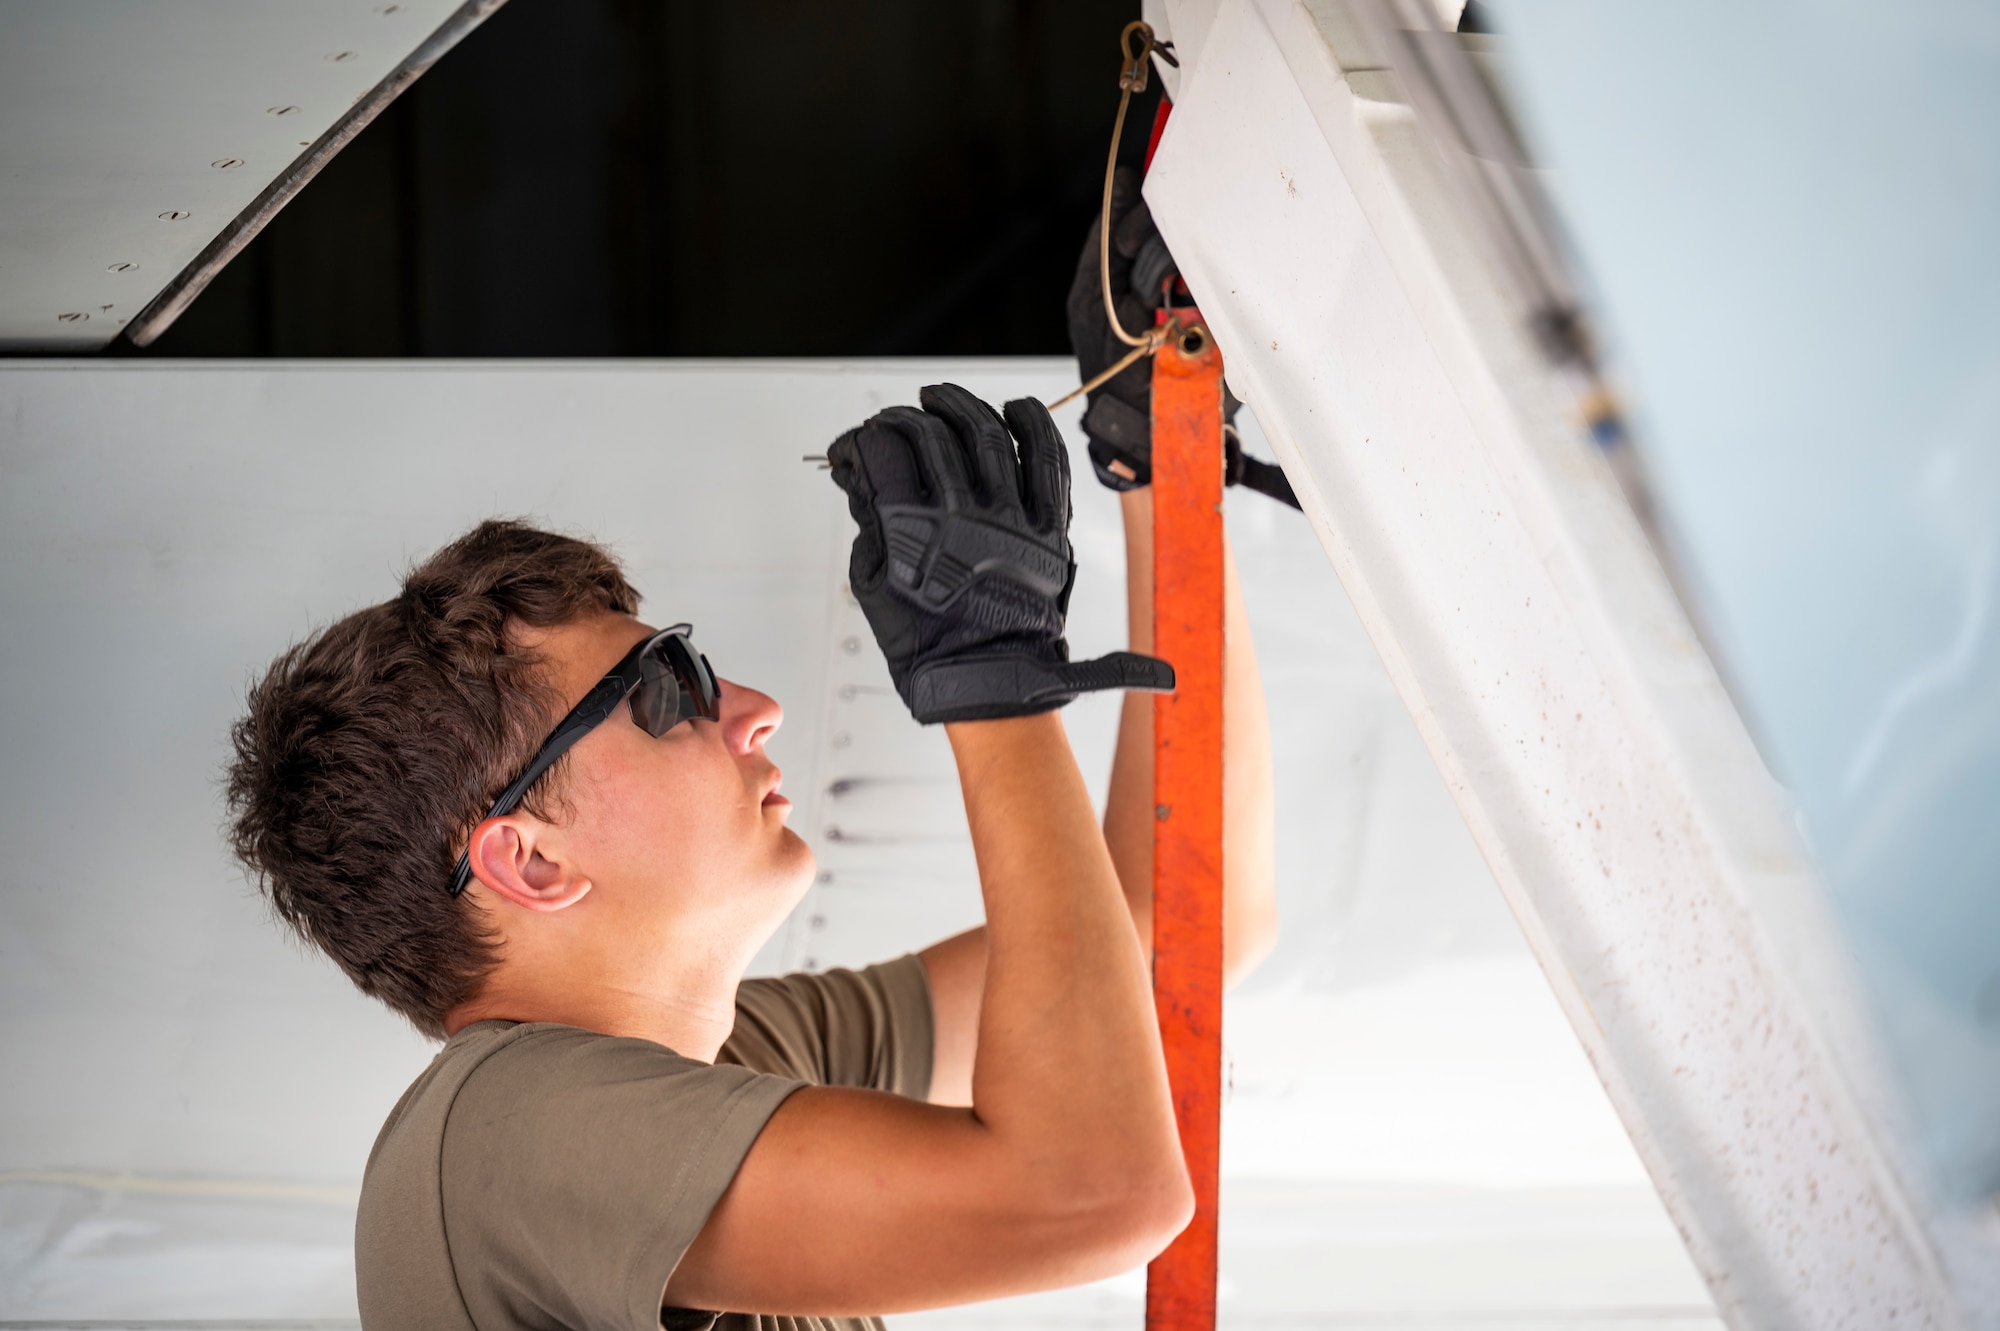 Service member working on an aircraft outside